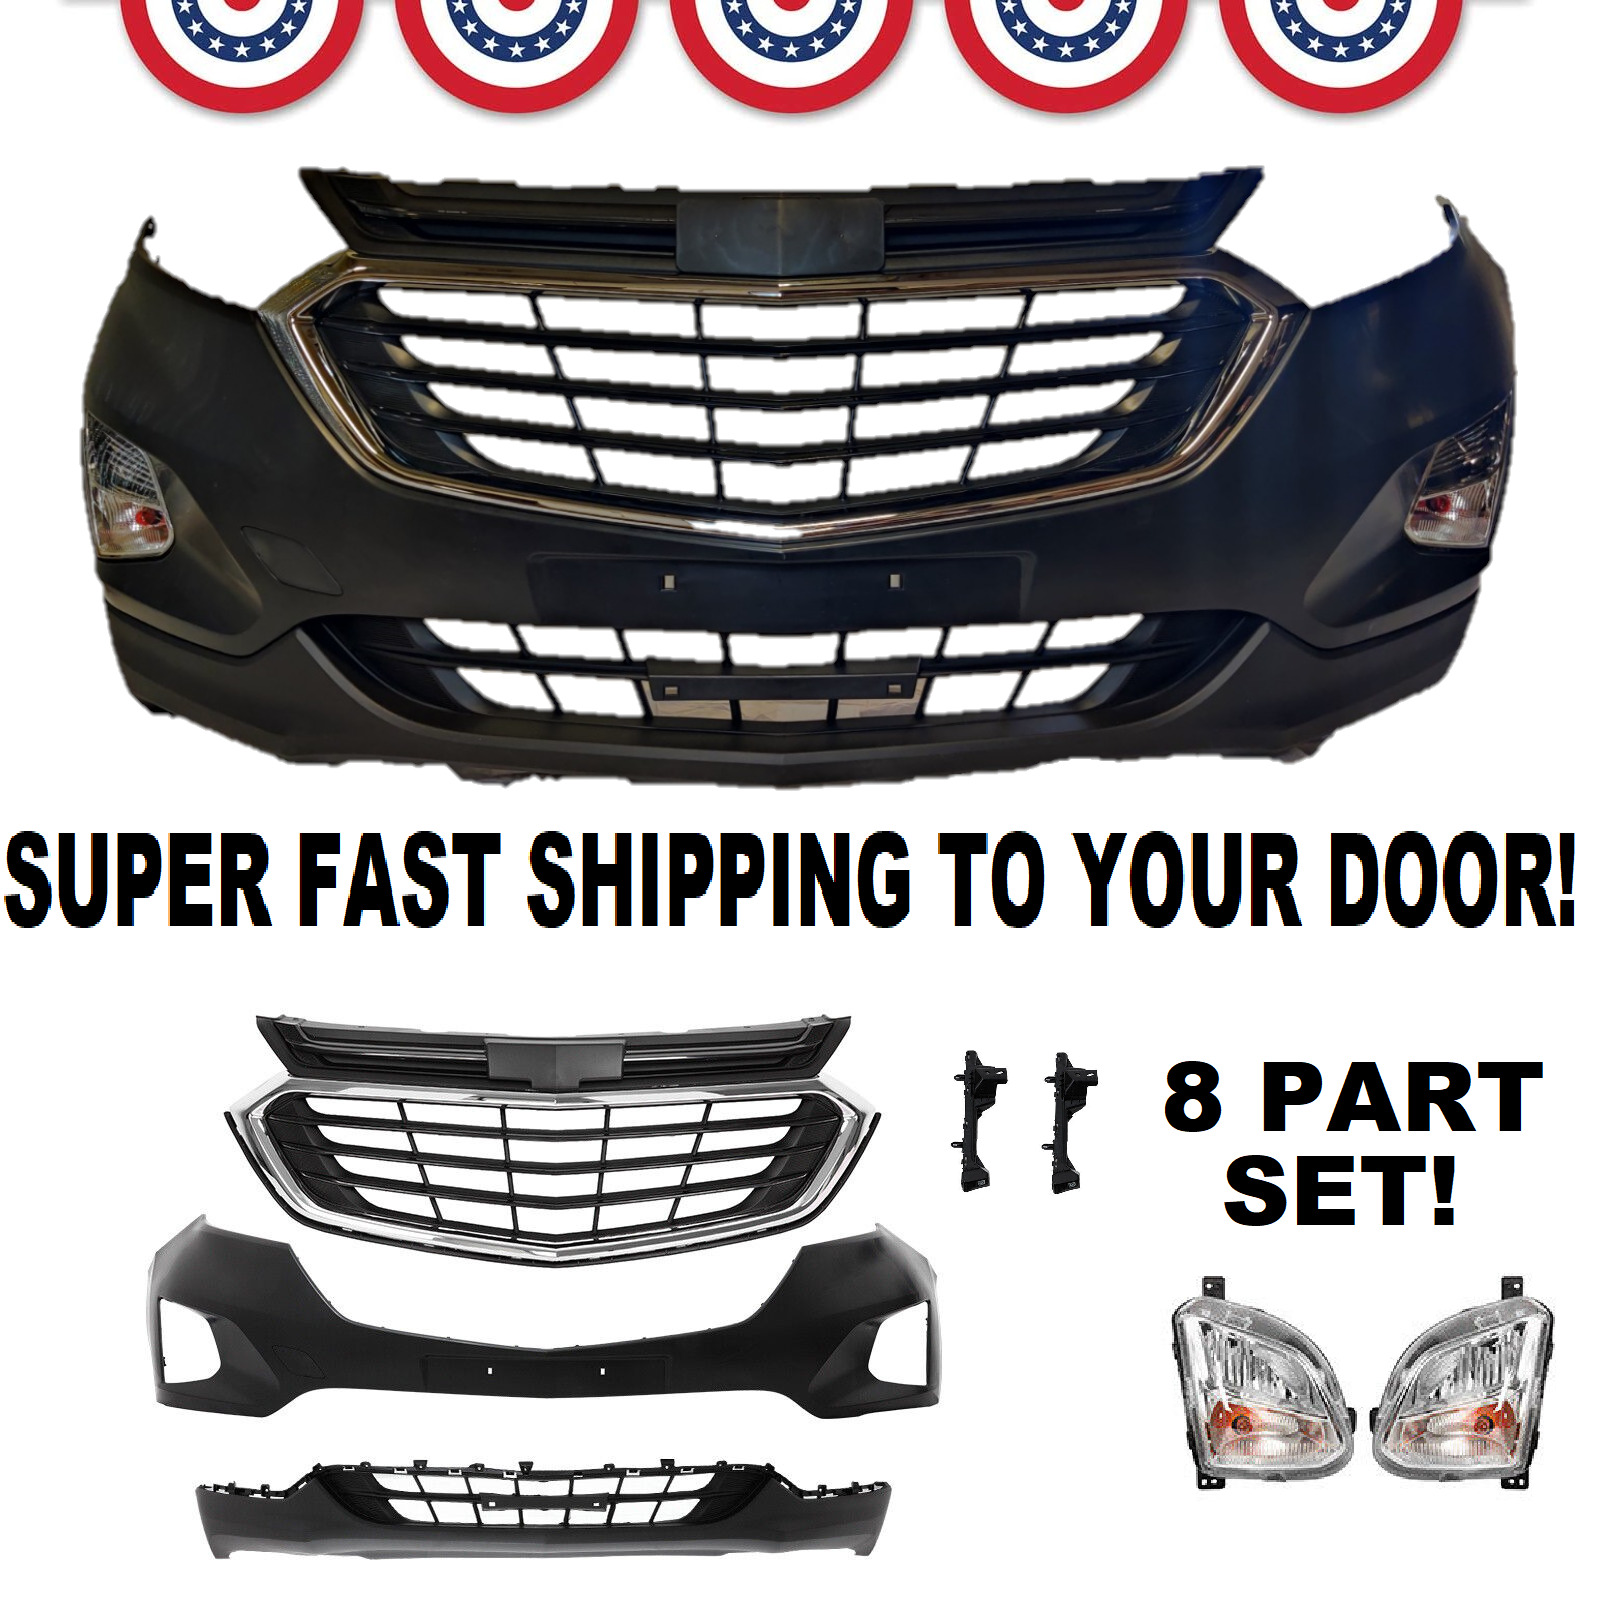 FOR CHEVY EQUINOX Front Bumper Cover 2018 2019 2020 2021